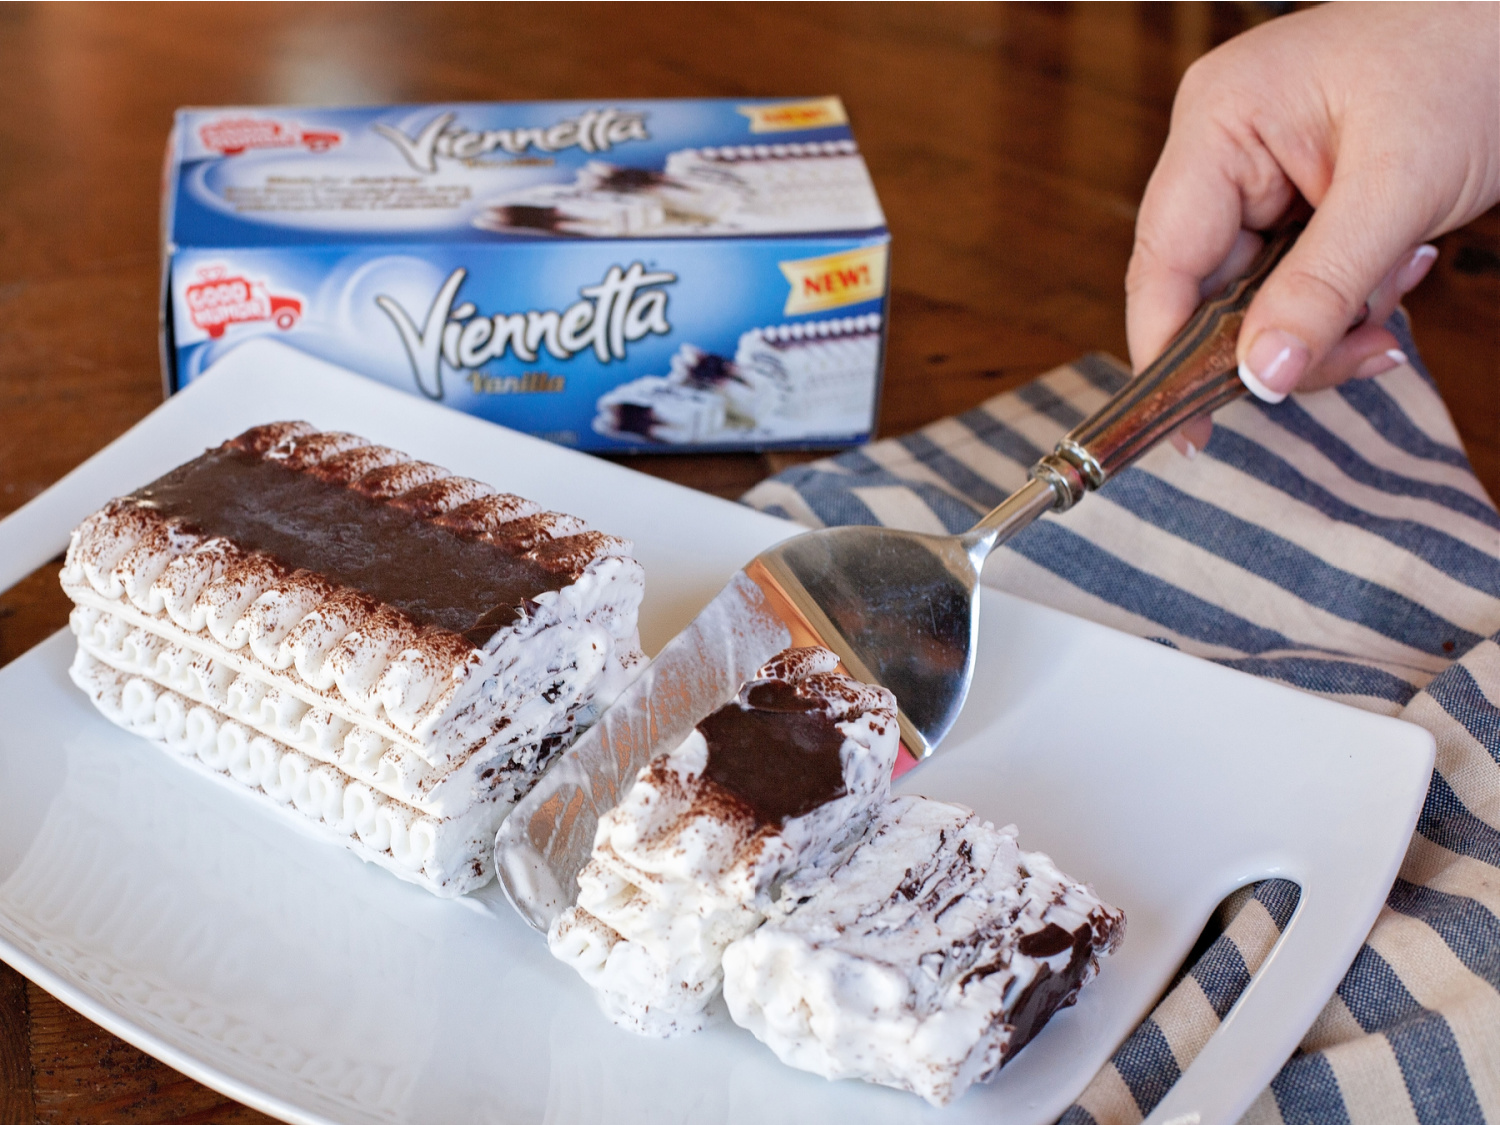 Still Time To Save On NEW Viennetta Cake - Load The Coupon To Save $2 At Publix on I Heart Publix 1